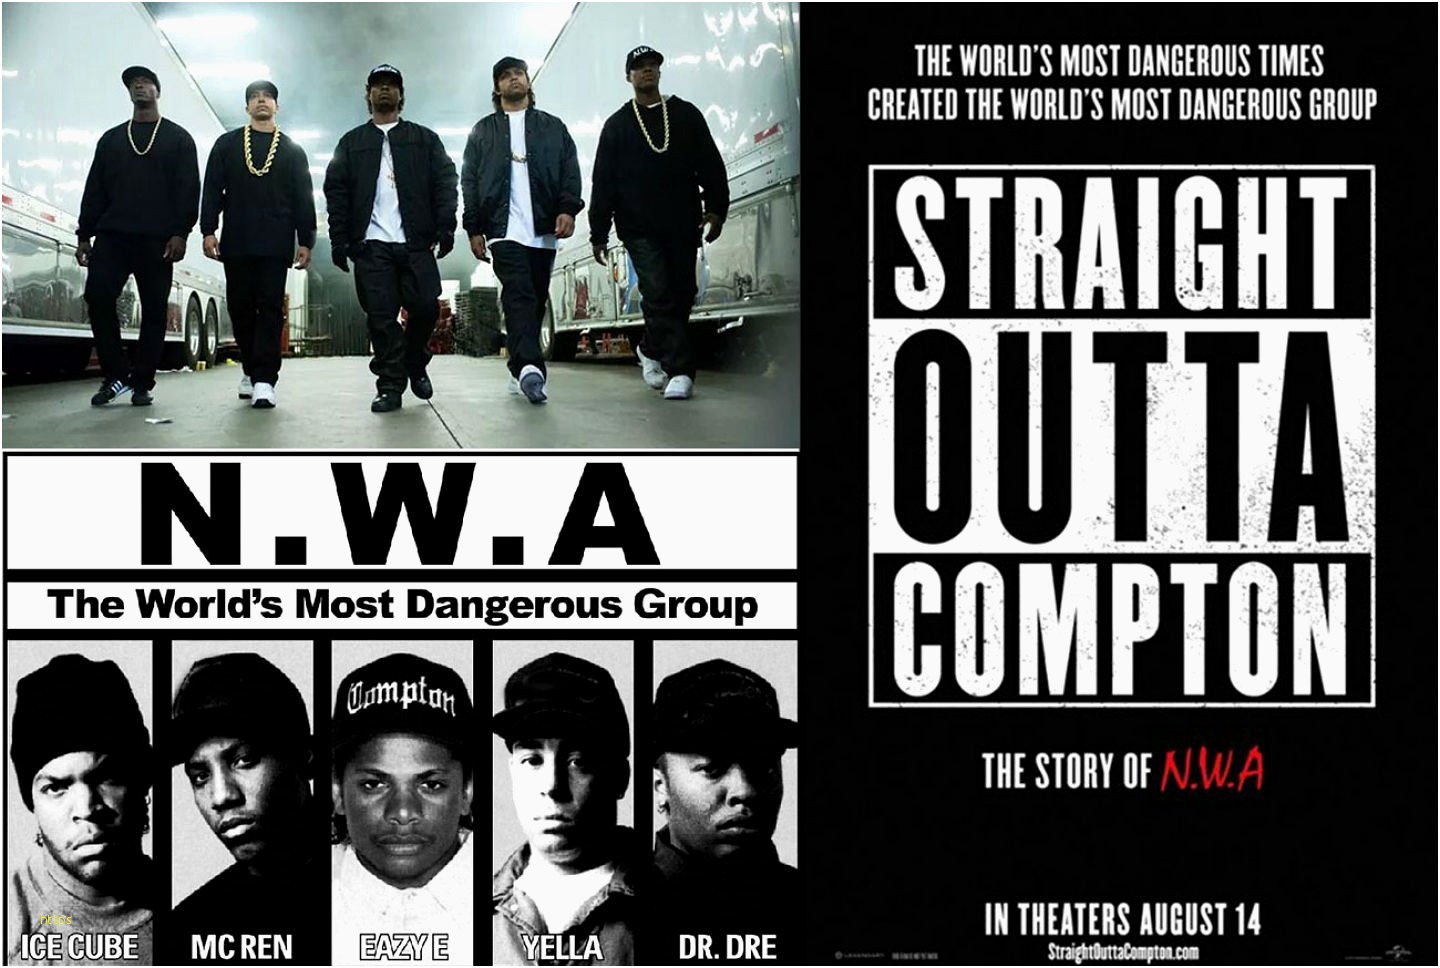 nwa iphone wallpaper,font,poster,album cover,advertising,movie